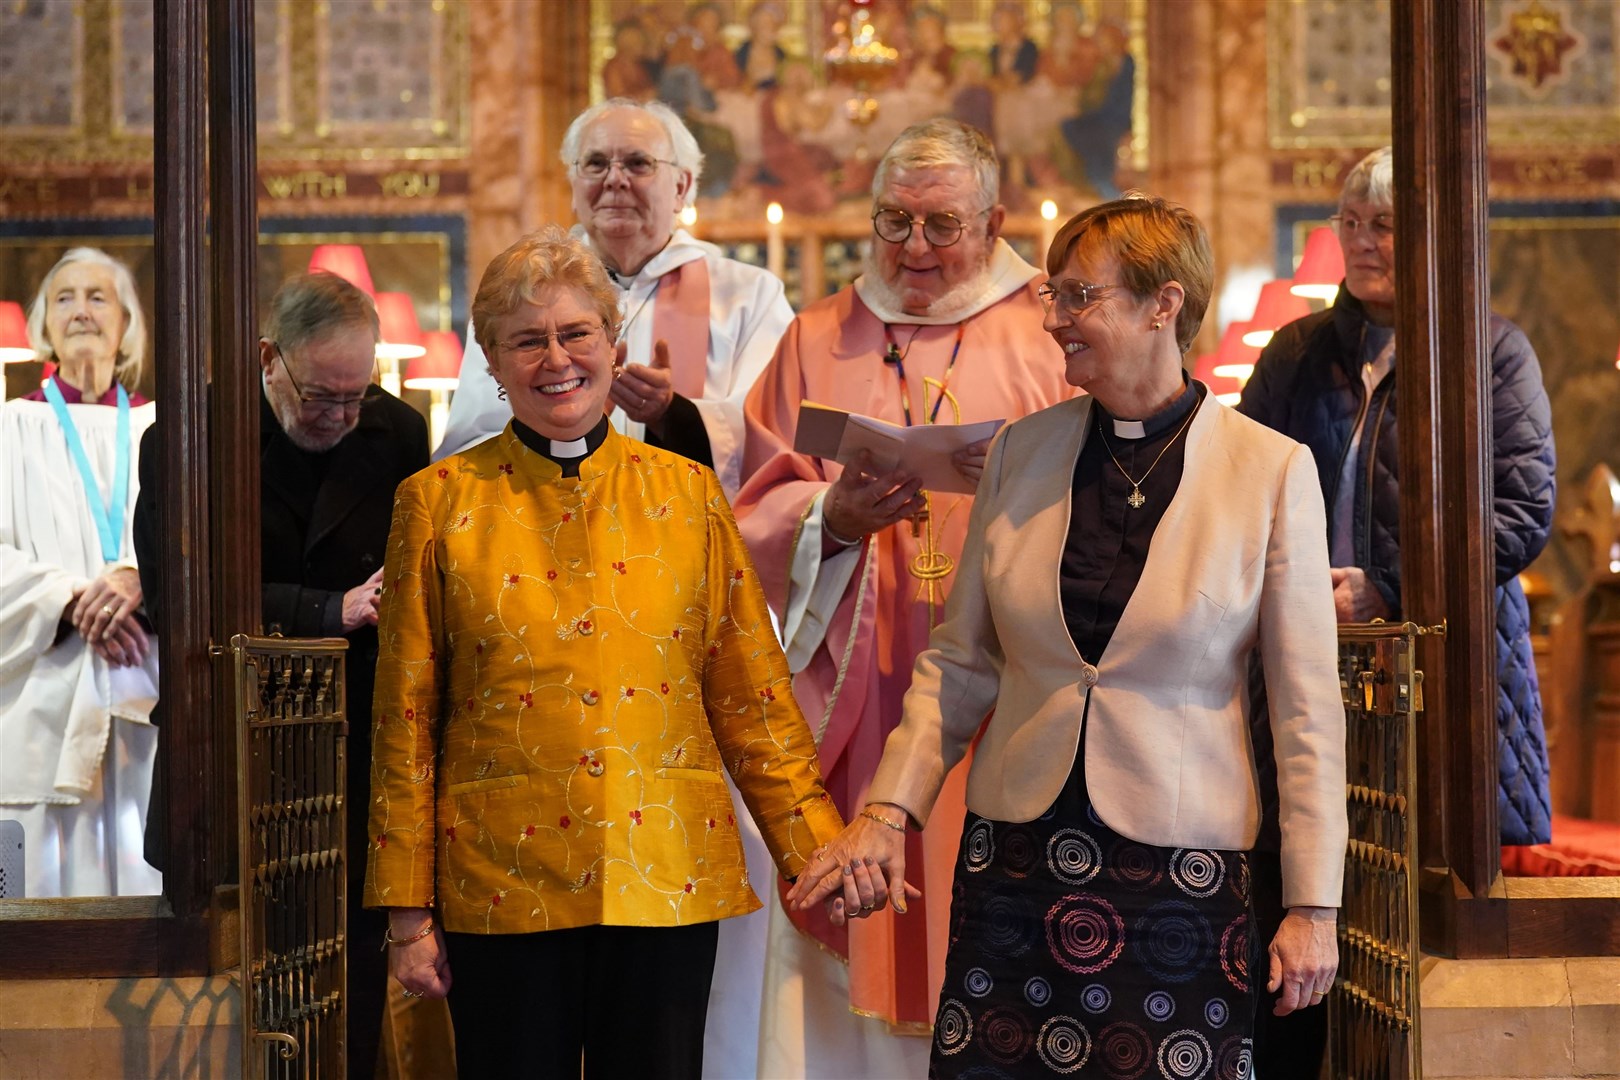 Catherine Bond and Jane Pearce were given a round of applause by the congregation after the blessing (Joe Giddens/PA)